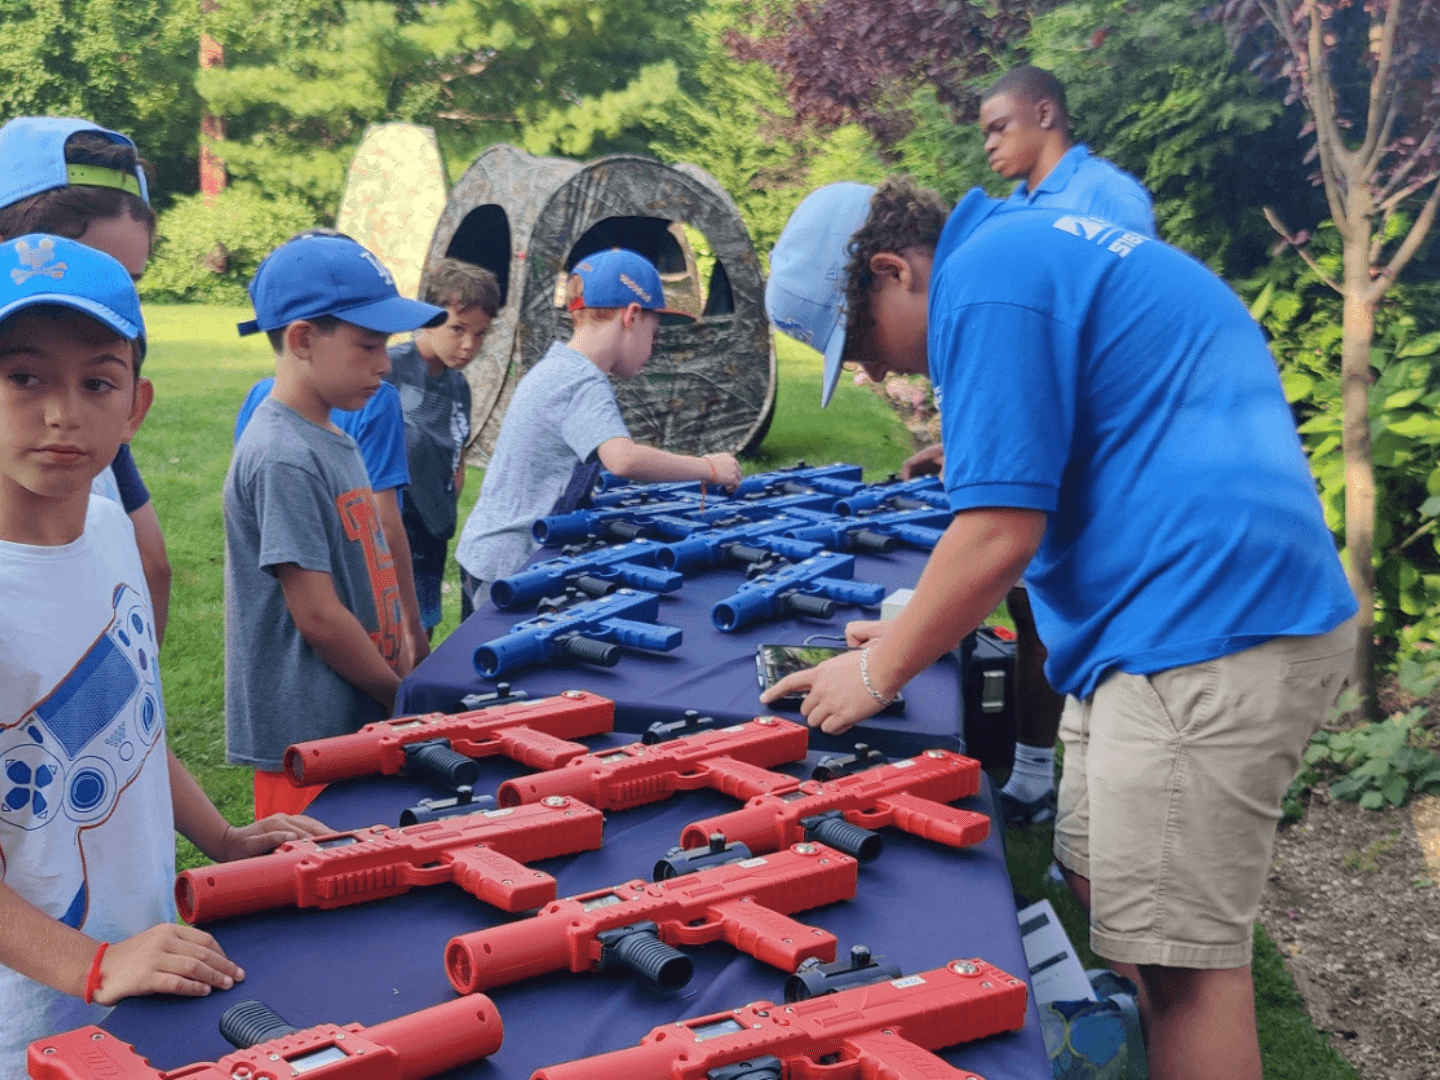 a long island laser tag employee preparing a laser blaster for use. five children are on the left side of the screen, there is a table with blue and red laser taggers separating the children from the laser tag employee on the right. 